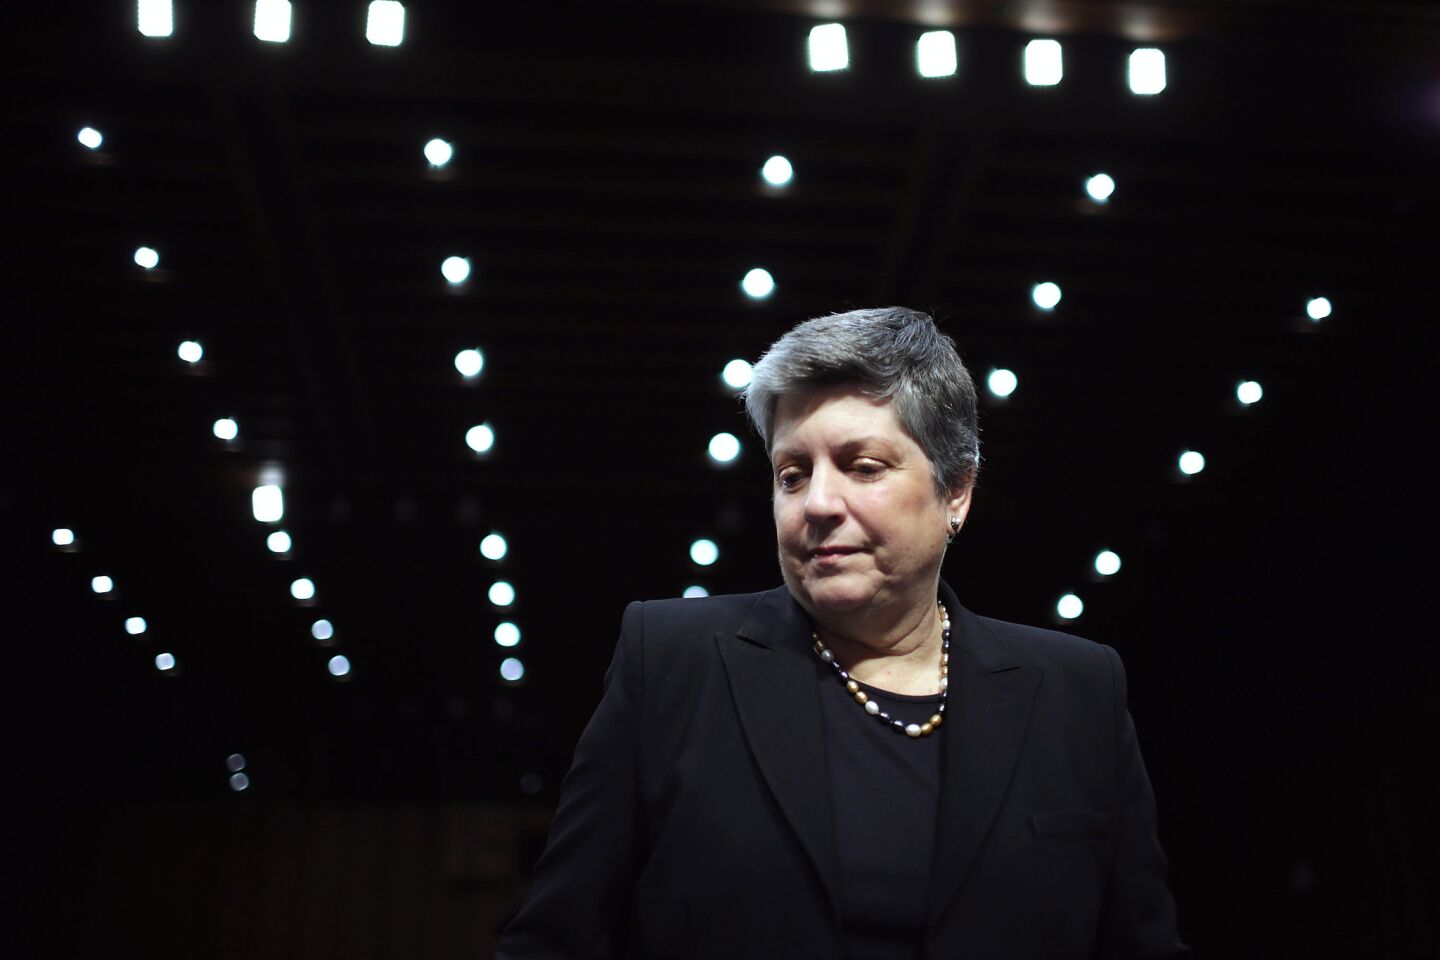 Former Homeland Security Secretary Janet Napolitano prepares to testify on immigration before the Senate Judiciary Committee.